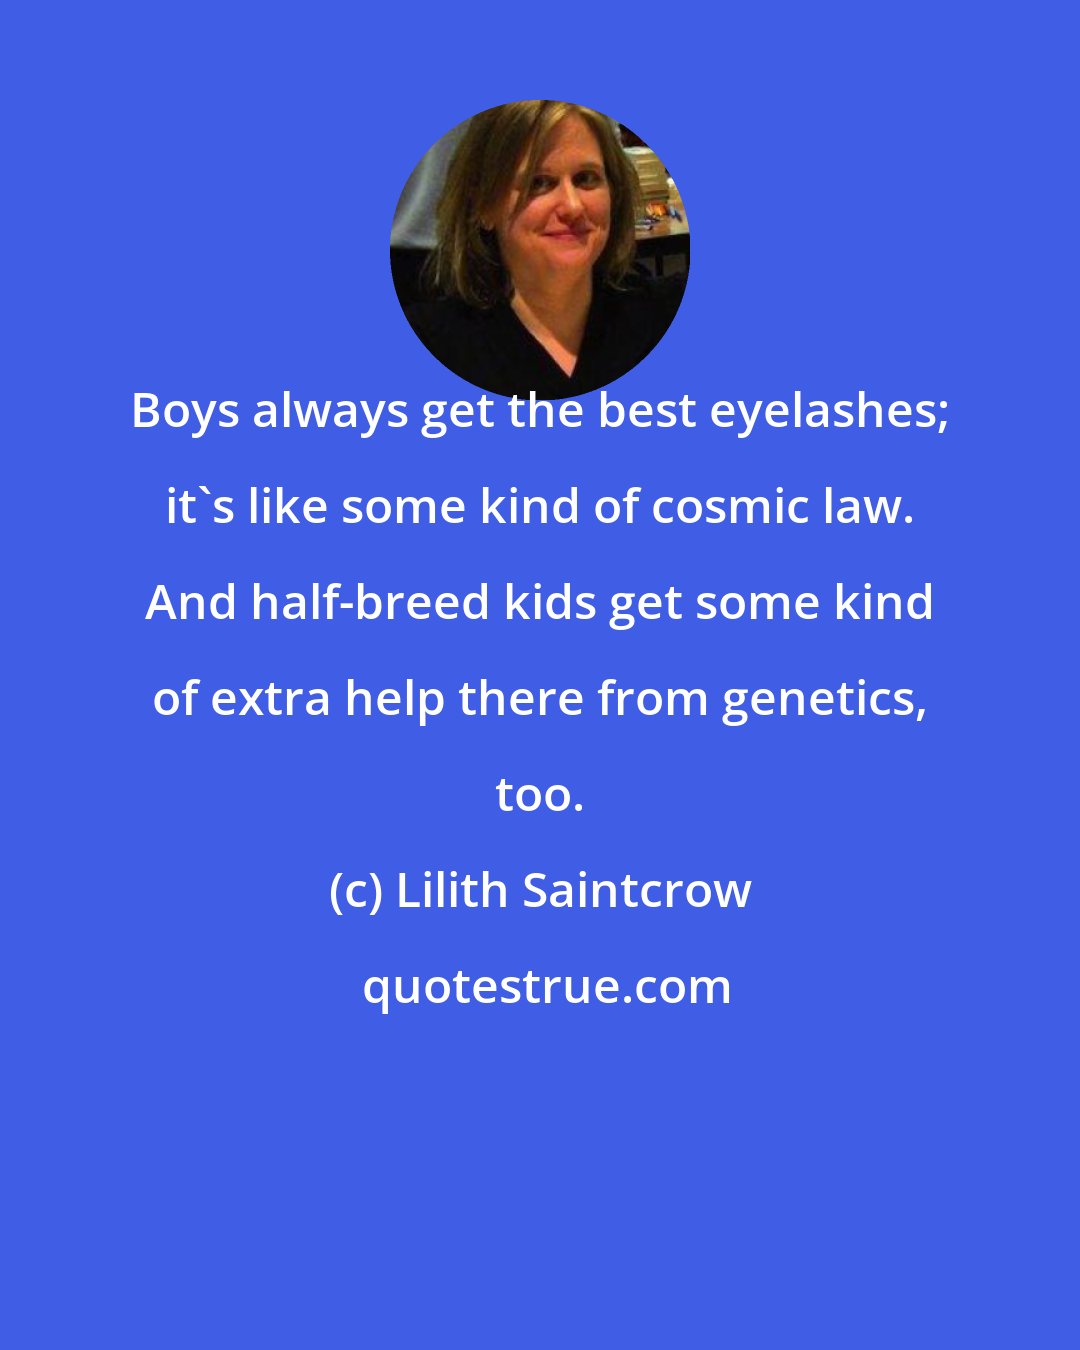 Lilith Saintcrow: Boys always get the best eyelashes; it's like some kind of cosmic law. And half-breed kids get some kind of extra help there from genetics, too.